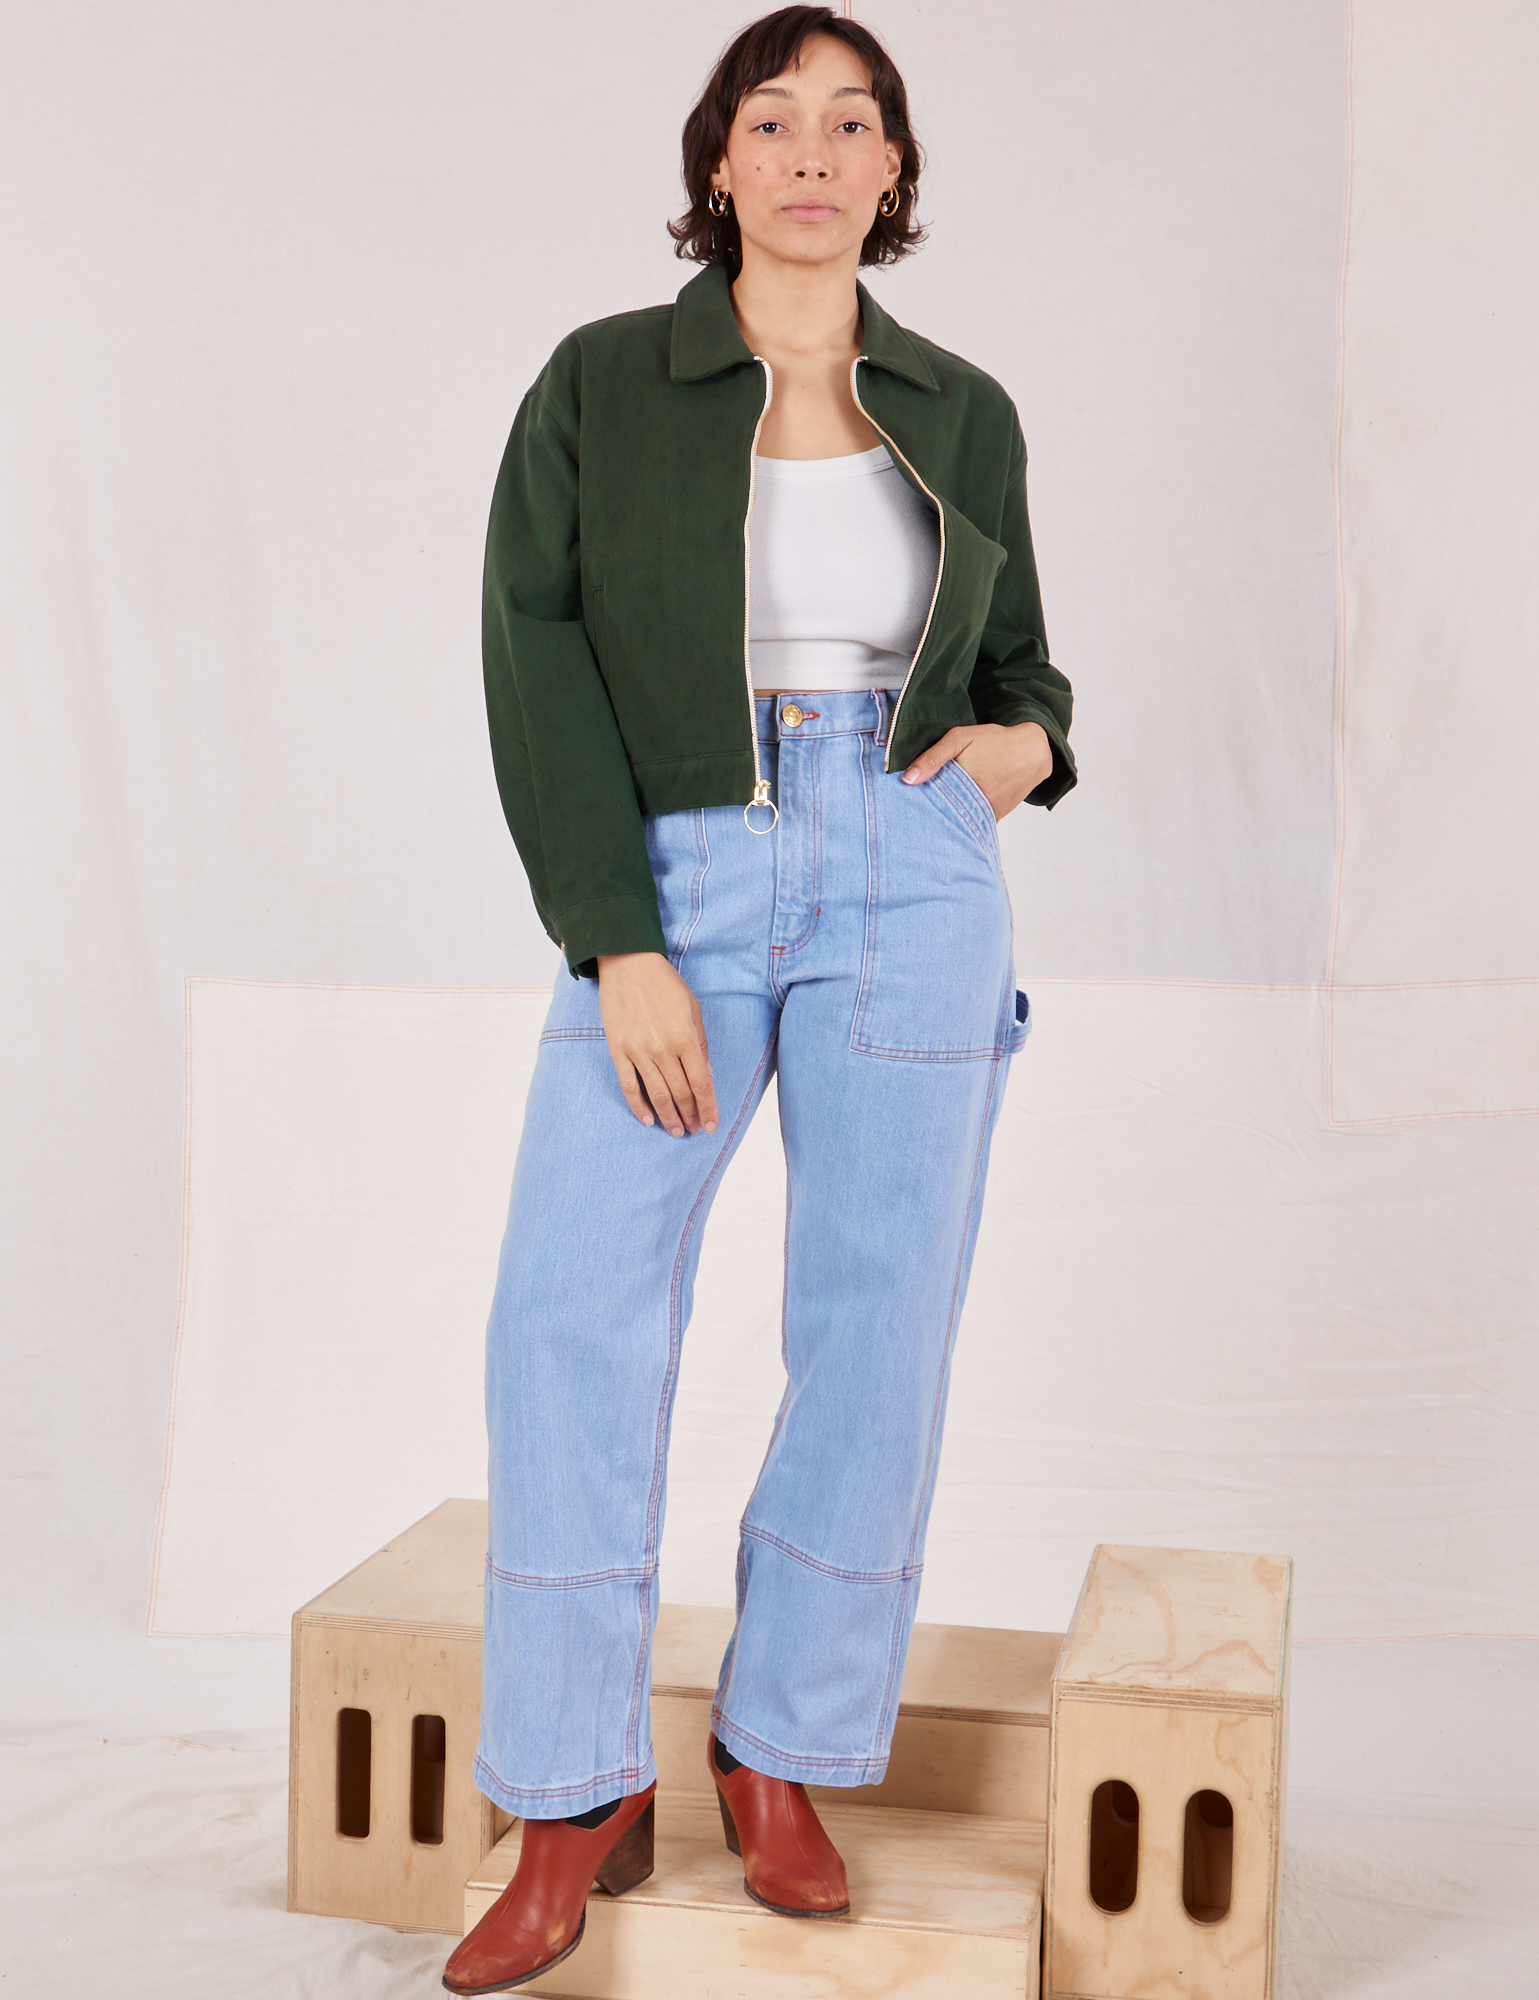 Tiara is wearing Ricky Jacket in Swamp Green with a vintage off-white tee Cami underneath and light wash Carpenter Jeans